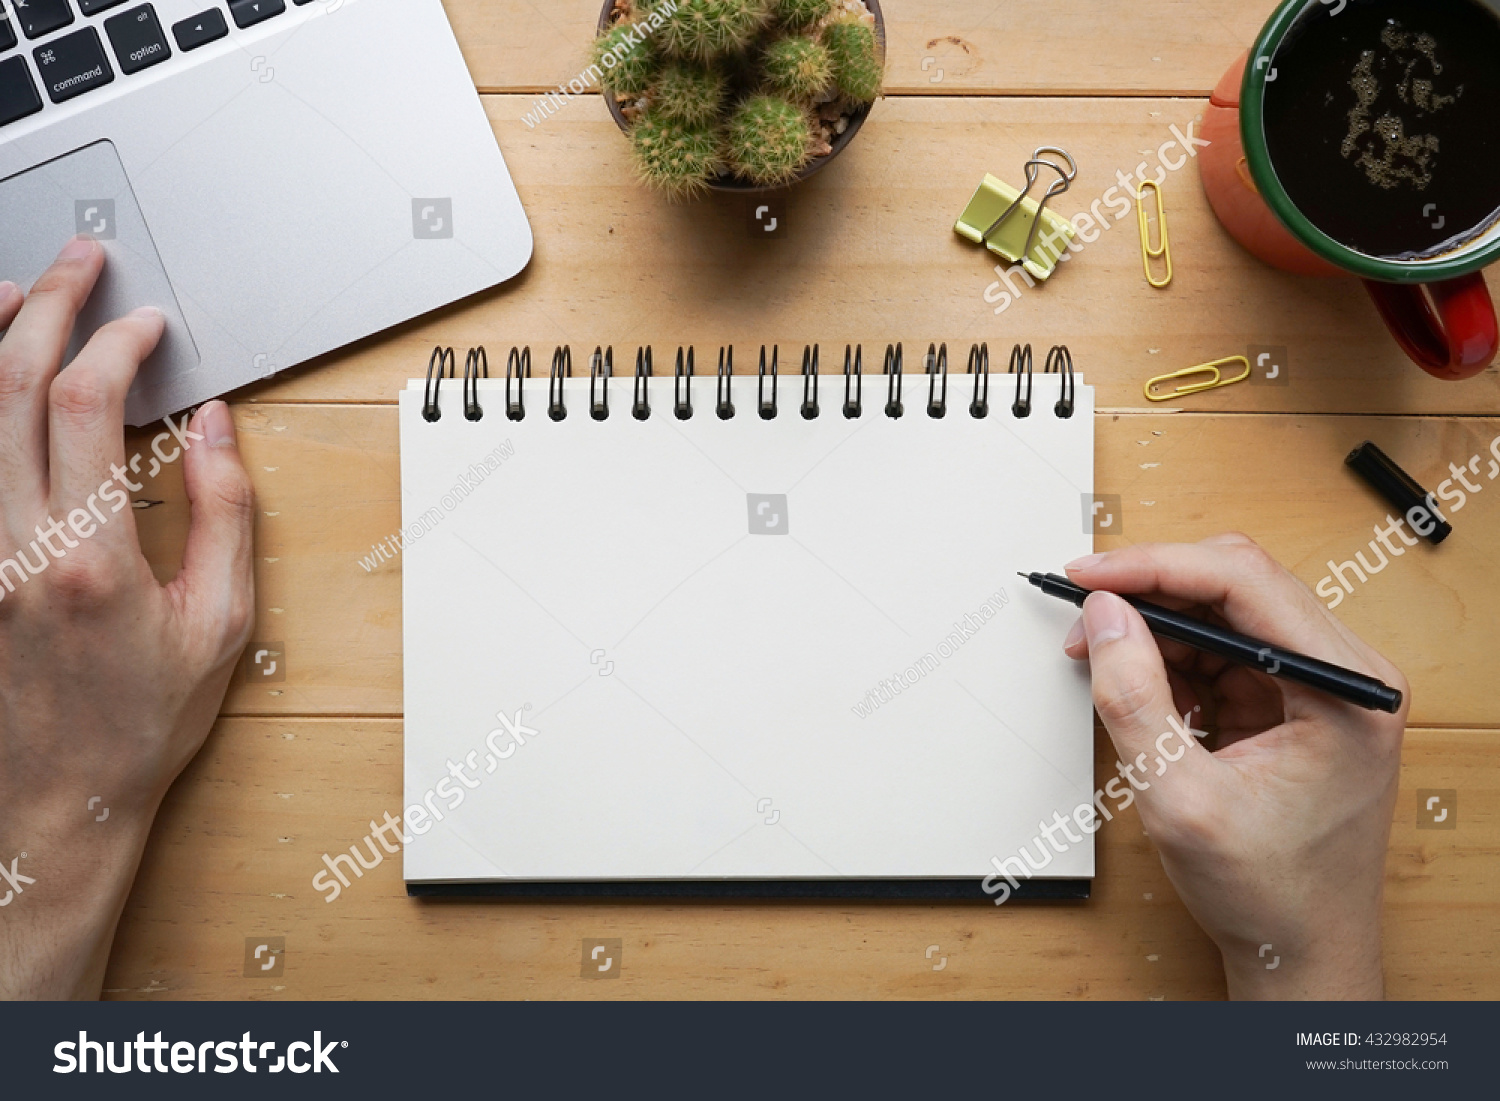 Person sketching or taking note down on blank open notebook with cup of fresh coffee on desk #432982954